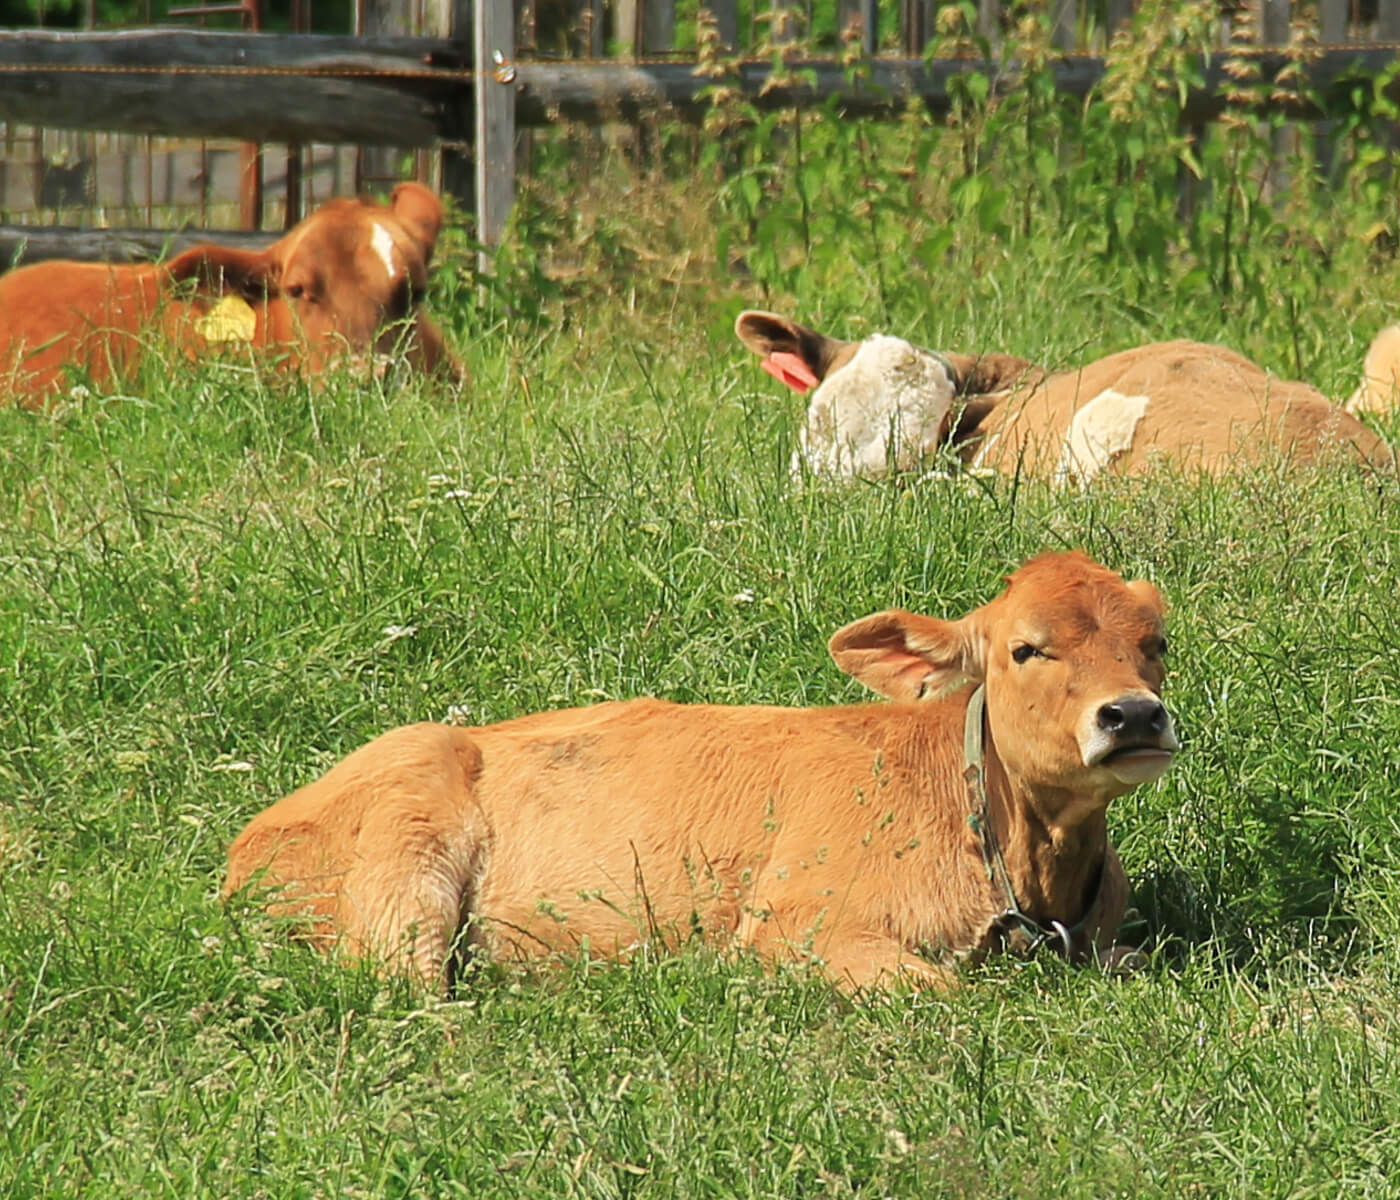 Calf nutrition: weaning practices – Part I